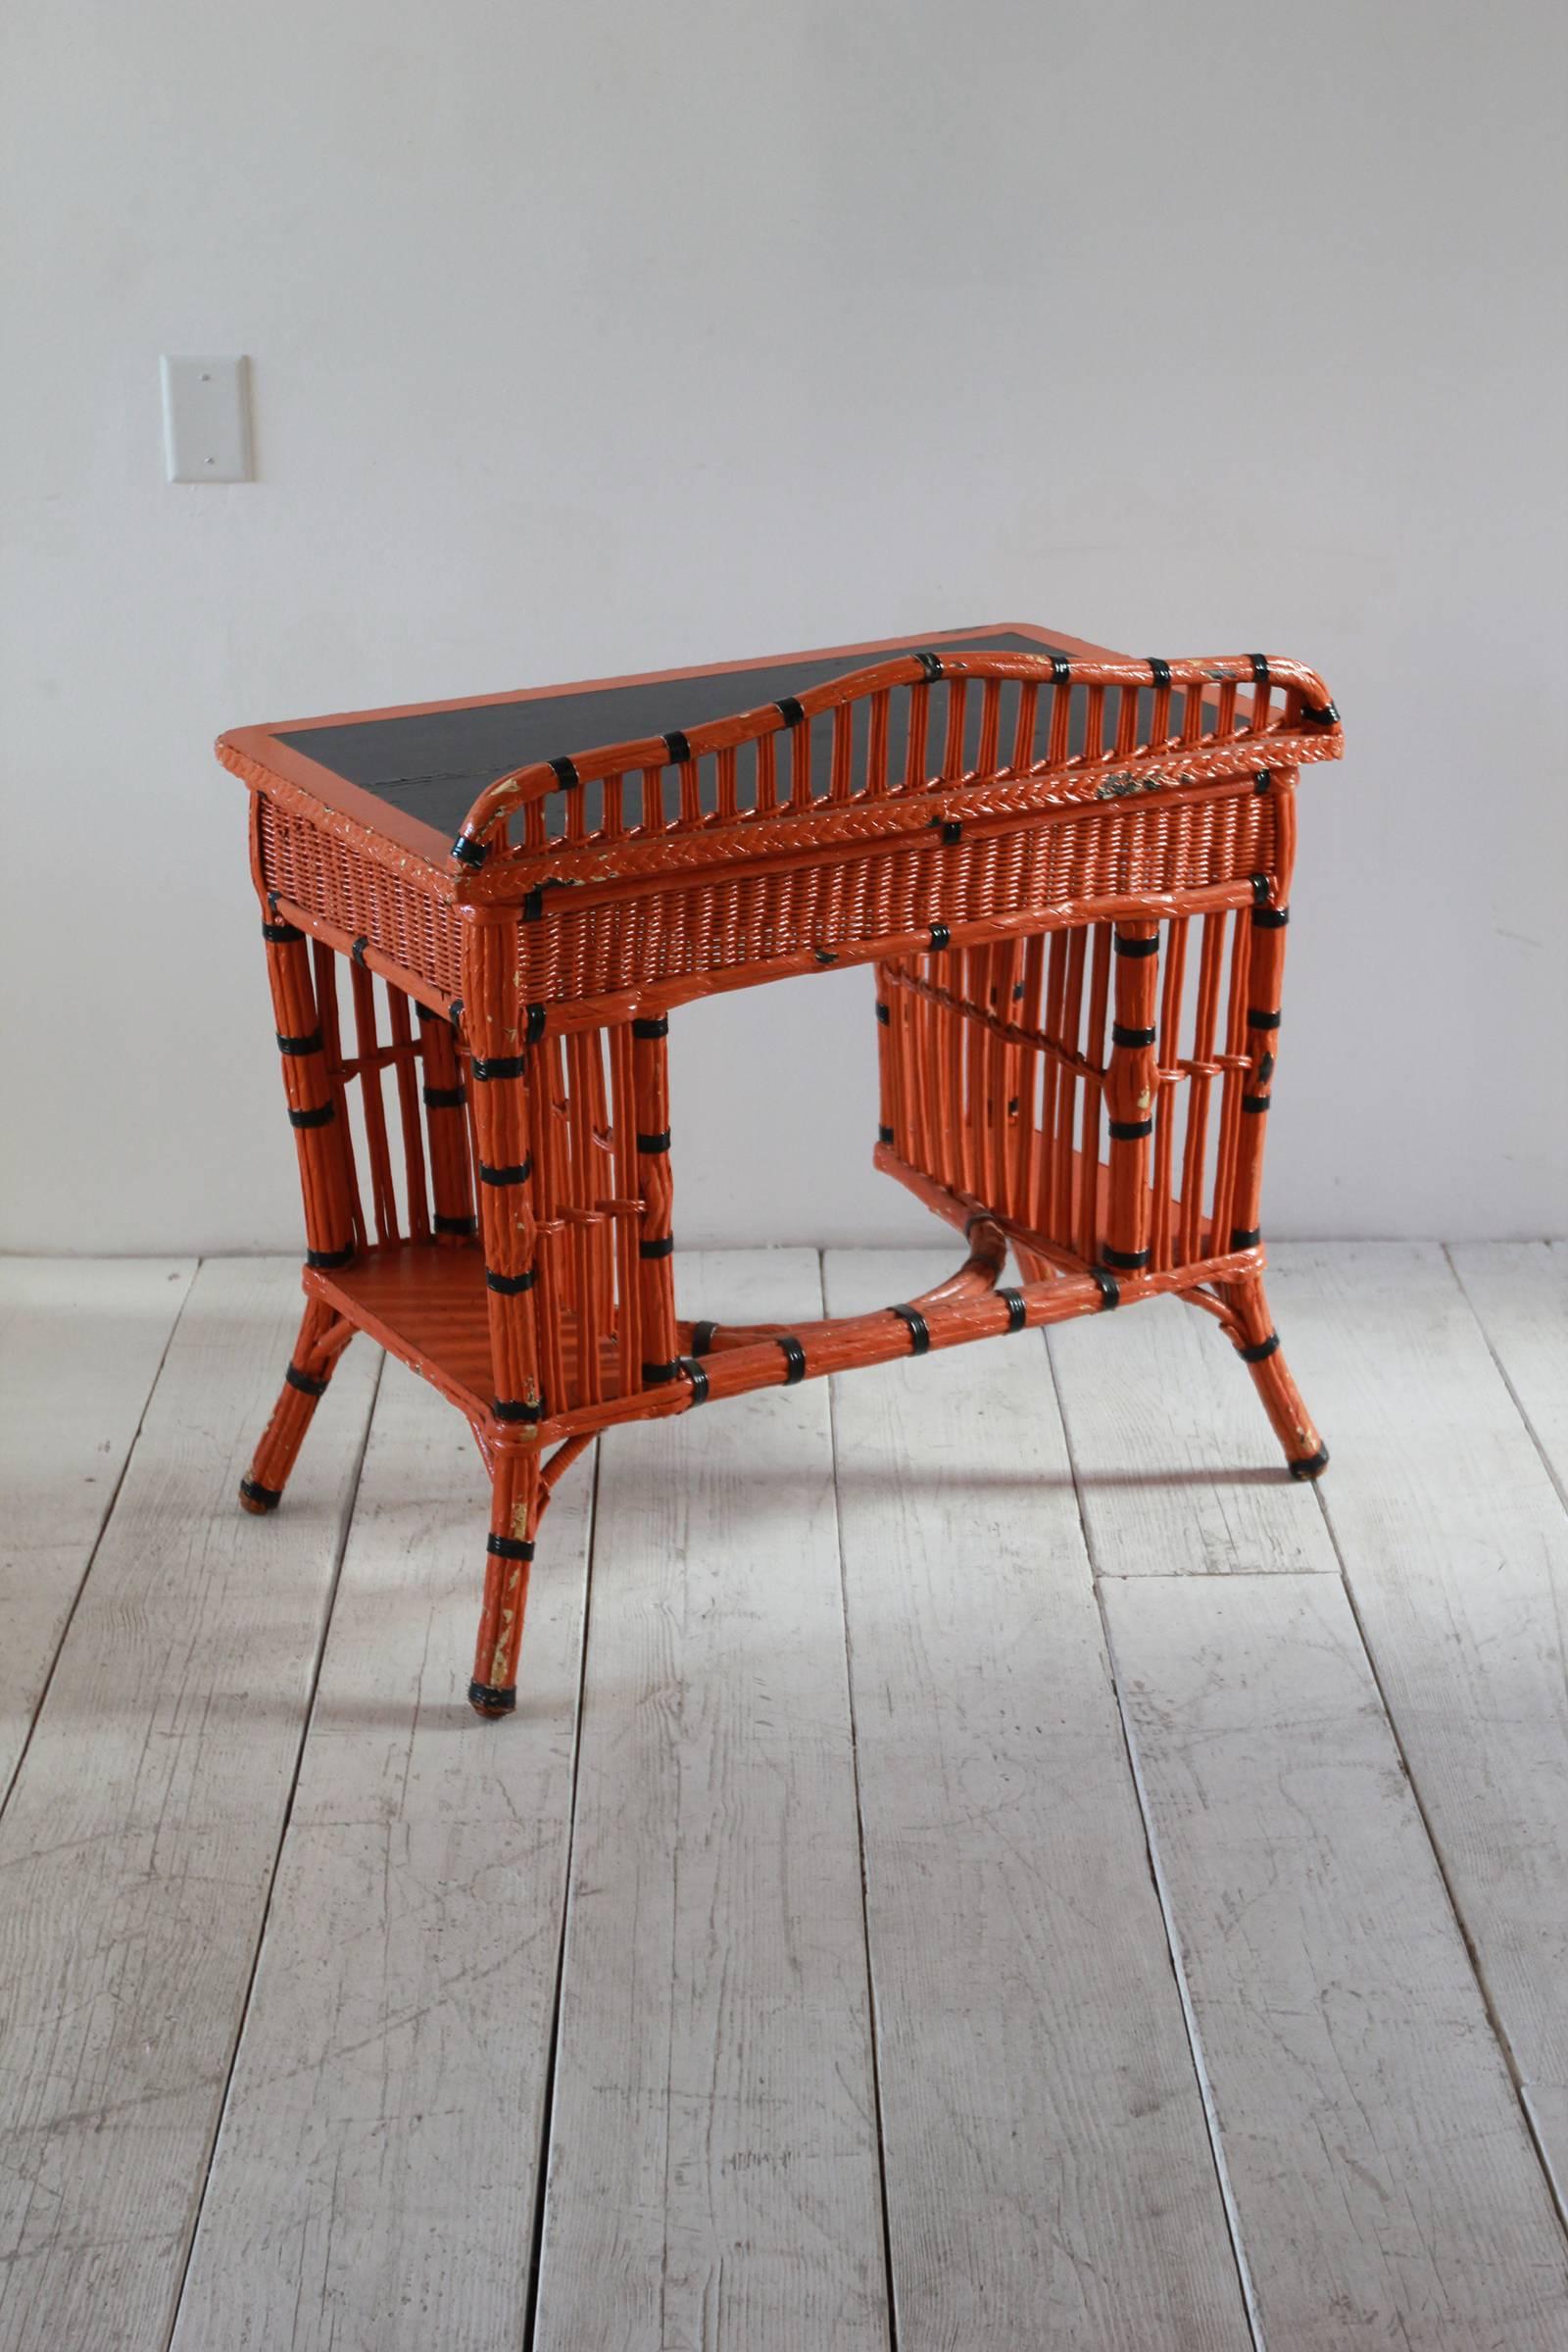 Folk painted orange and black vanity set with single pull-out drawer. Chair dimensions are: 36